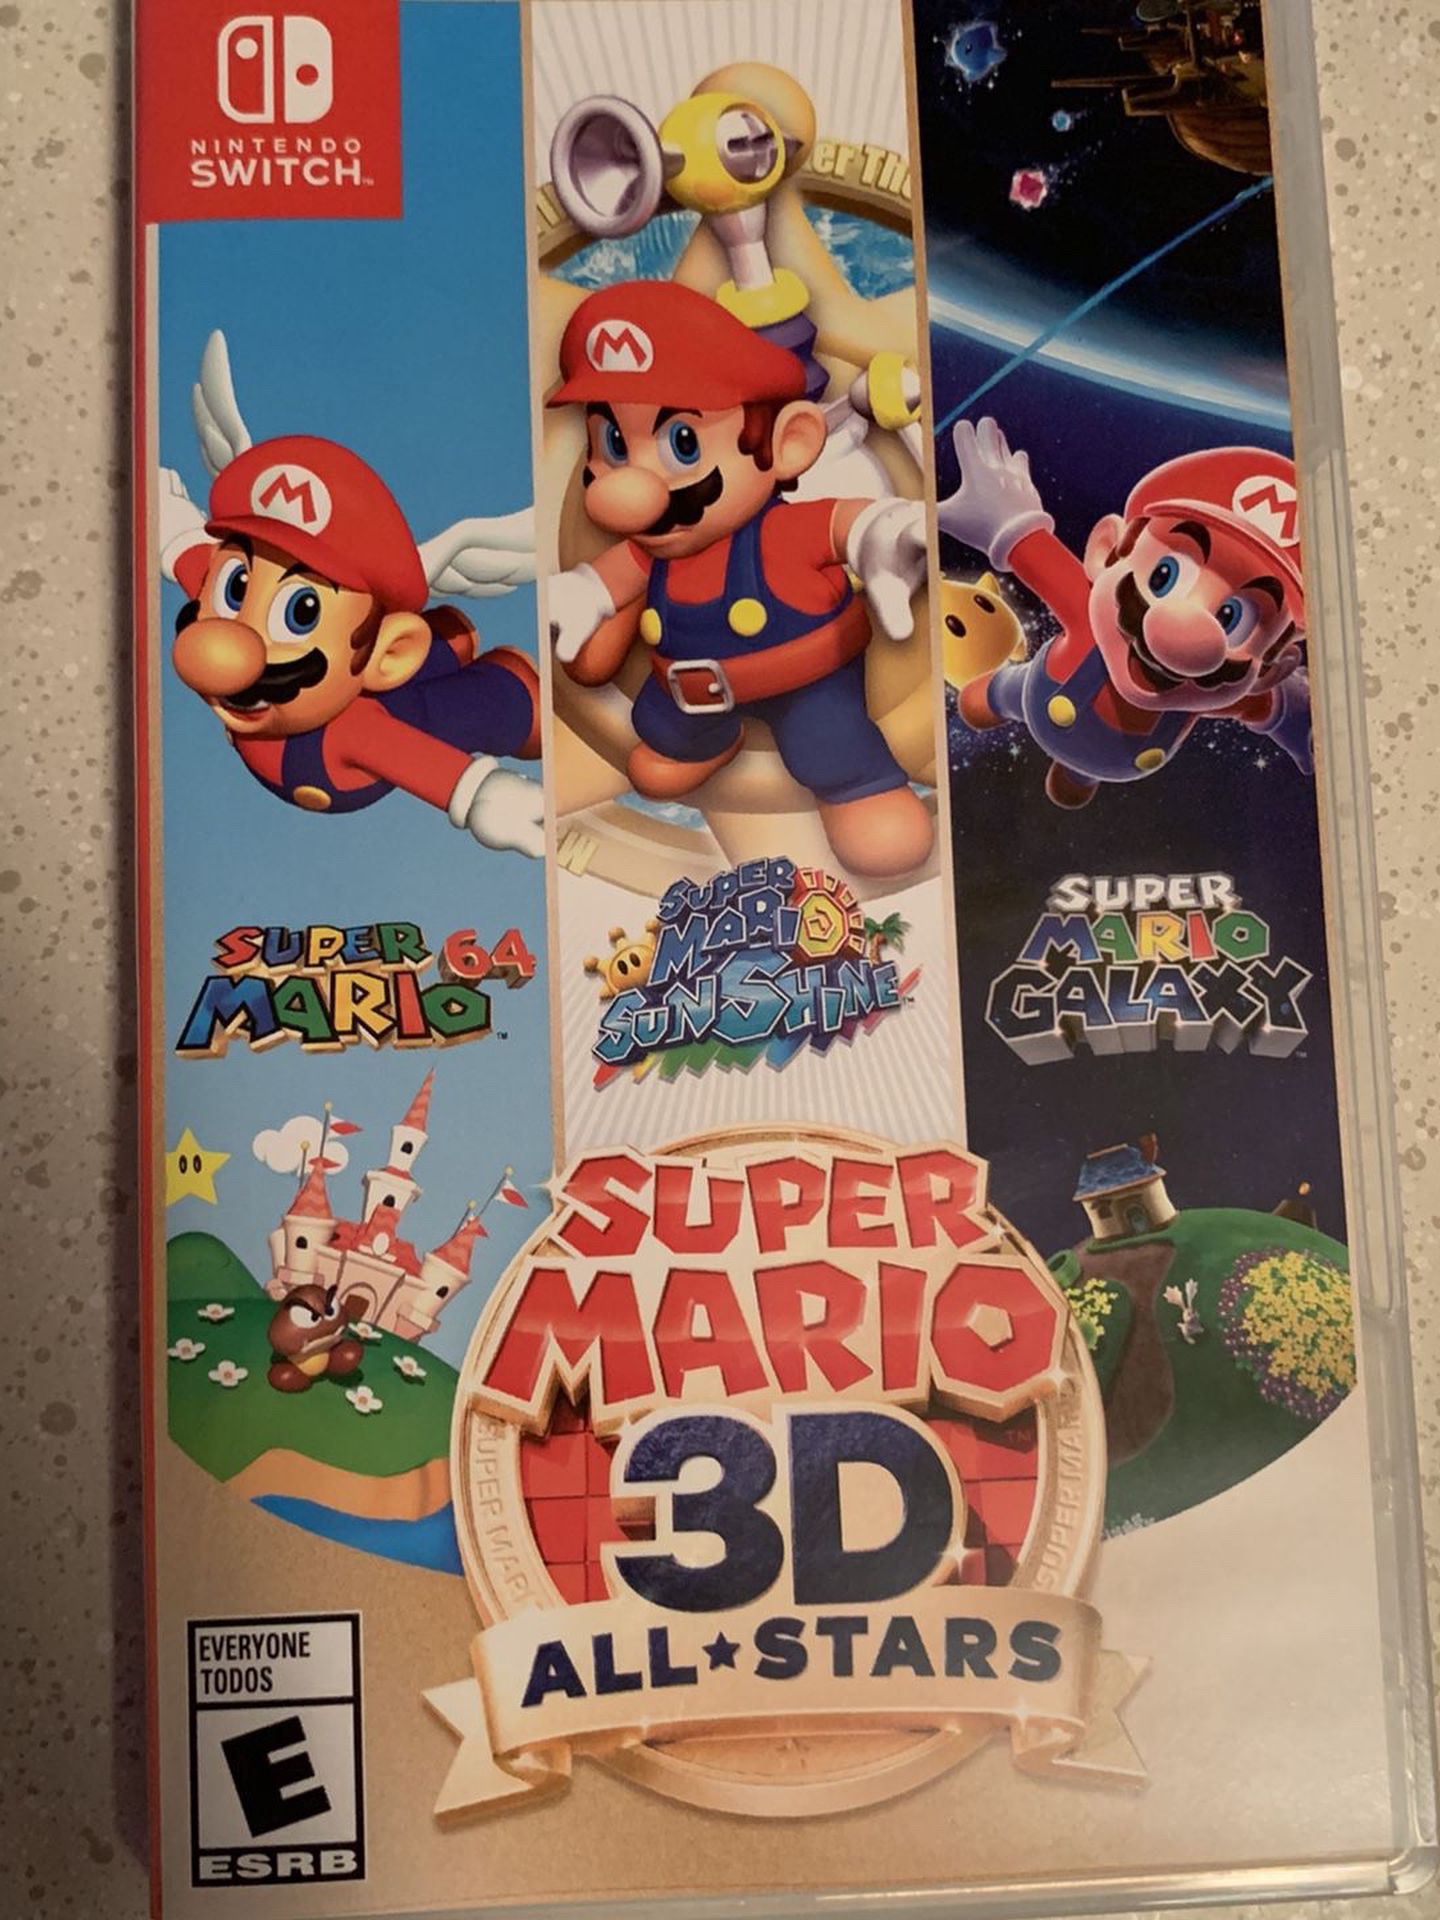 Super Mario 3D All-Star Nintendo Switch Game